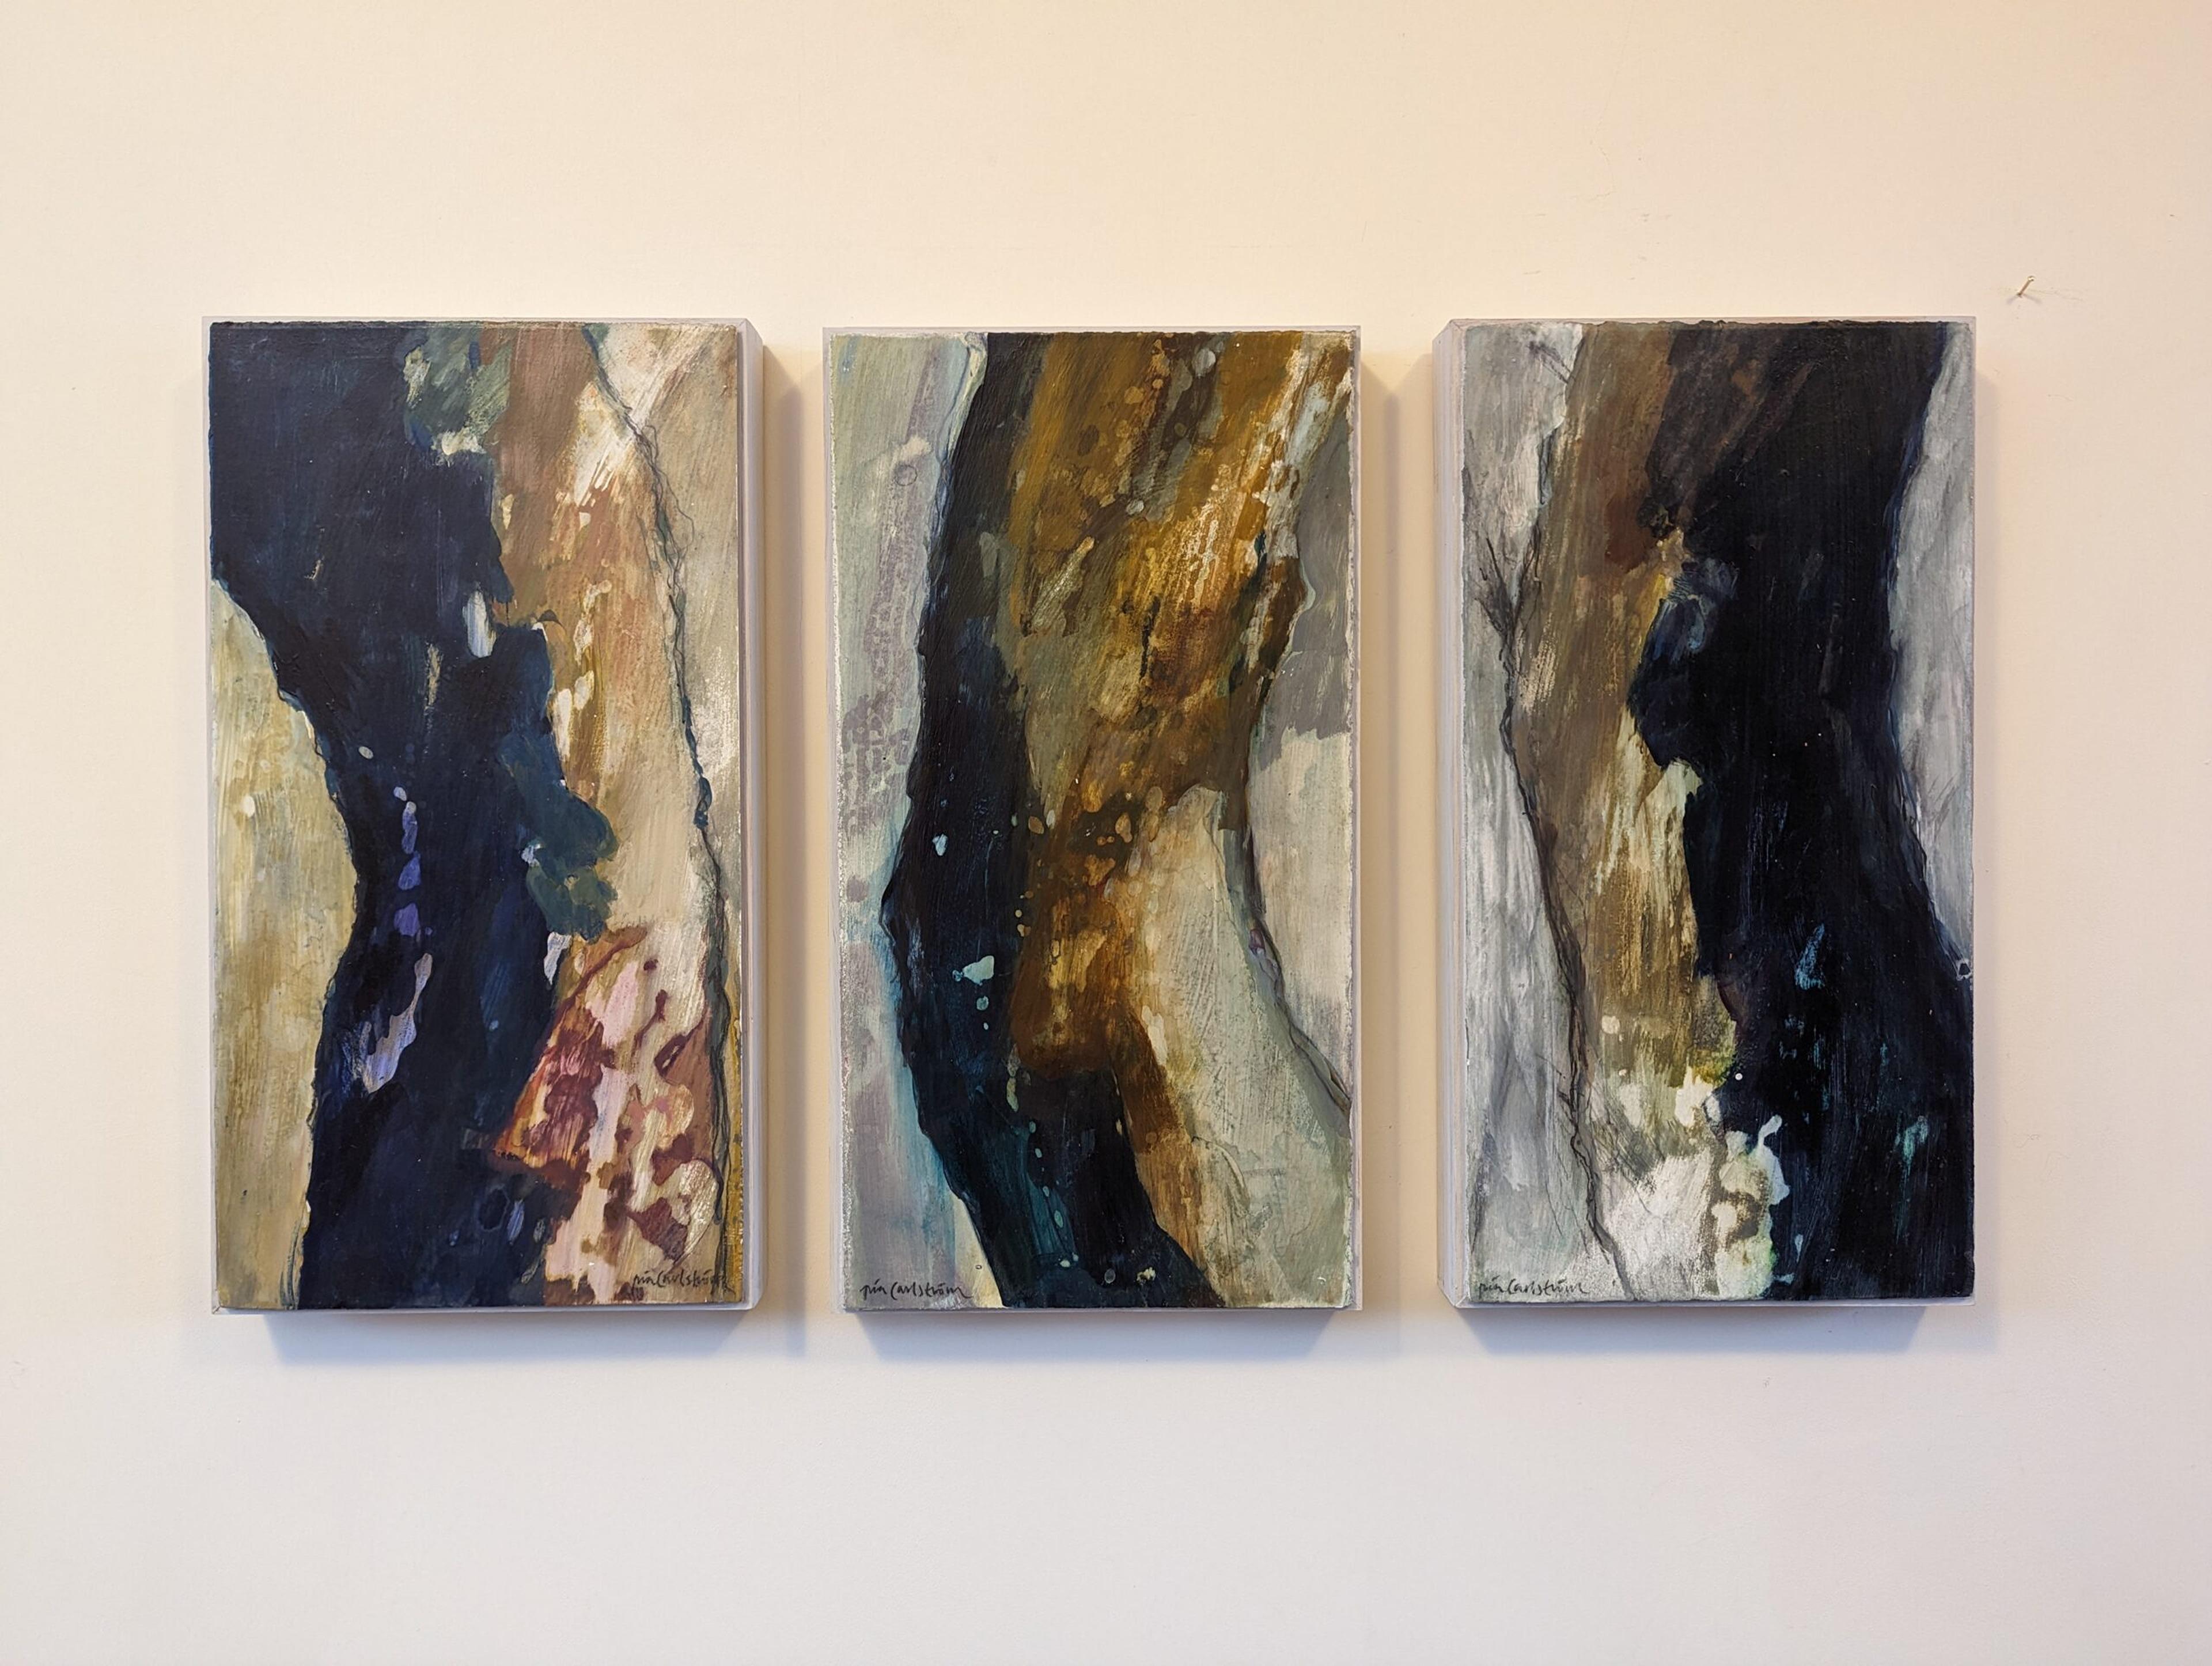 TRANSFERENCE (SET OF 3)
Acrylic on Panel
Size: 43 x 23 cm each panel x3  (including frame)

A captivating abstract triptych composition that unfolds across three individual panels, painted in acrylic onto panel and dated 2010.

Abstract in nature,